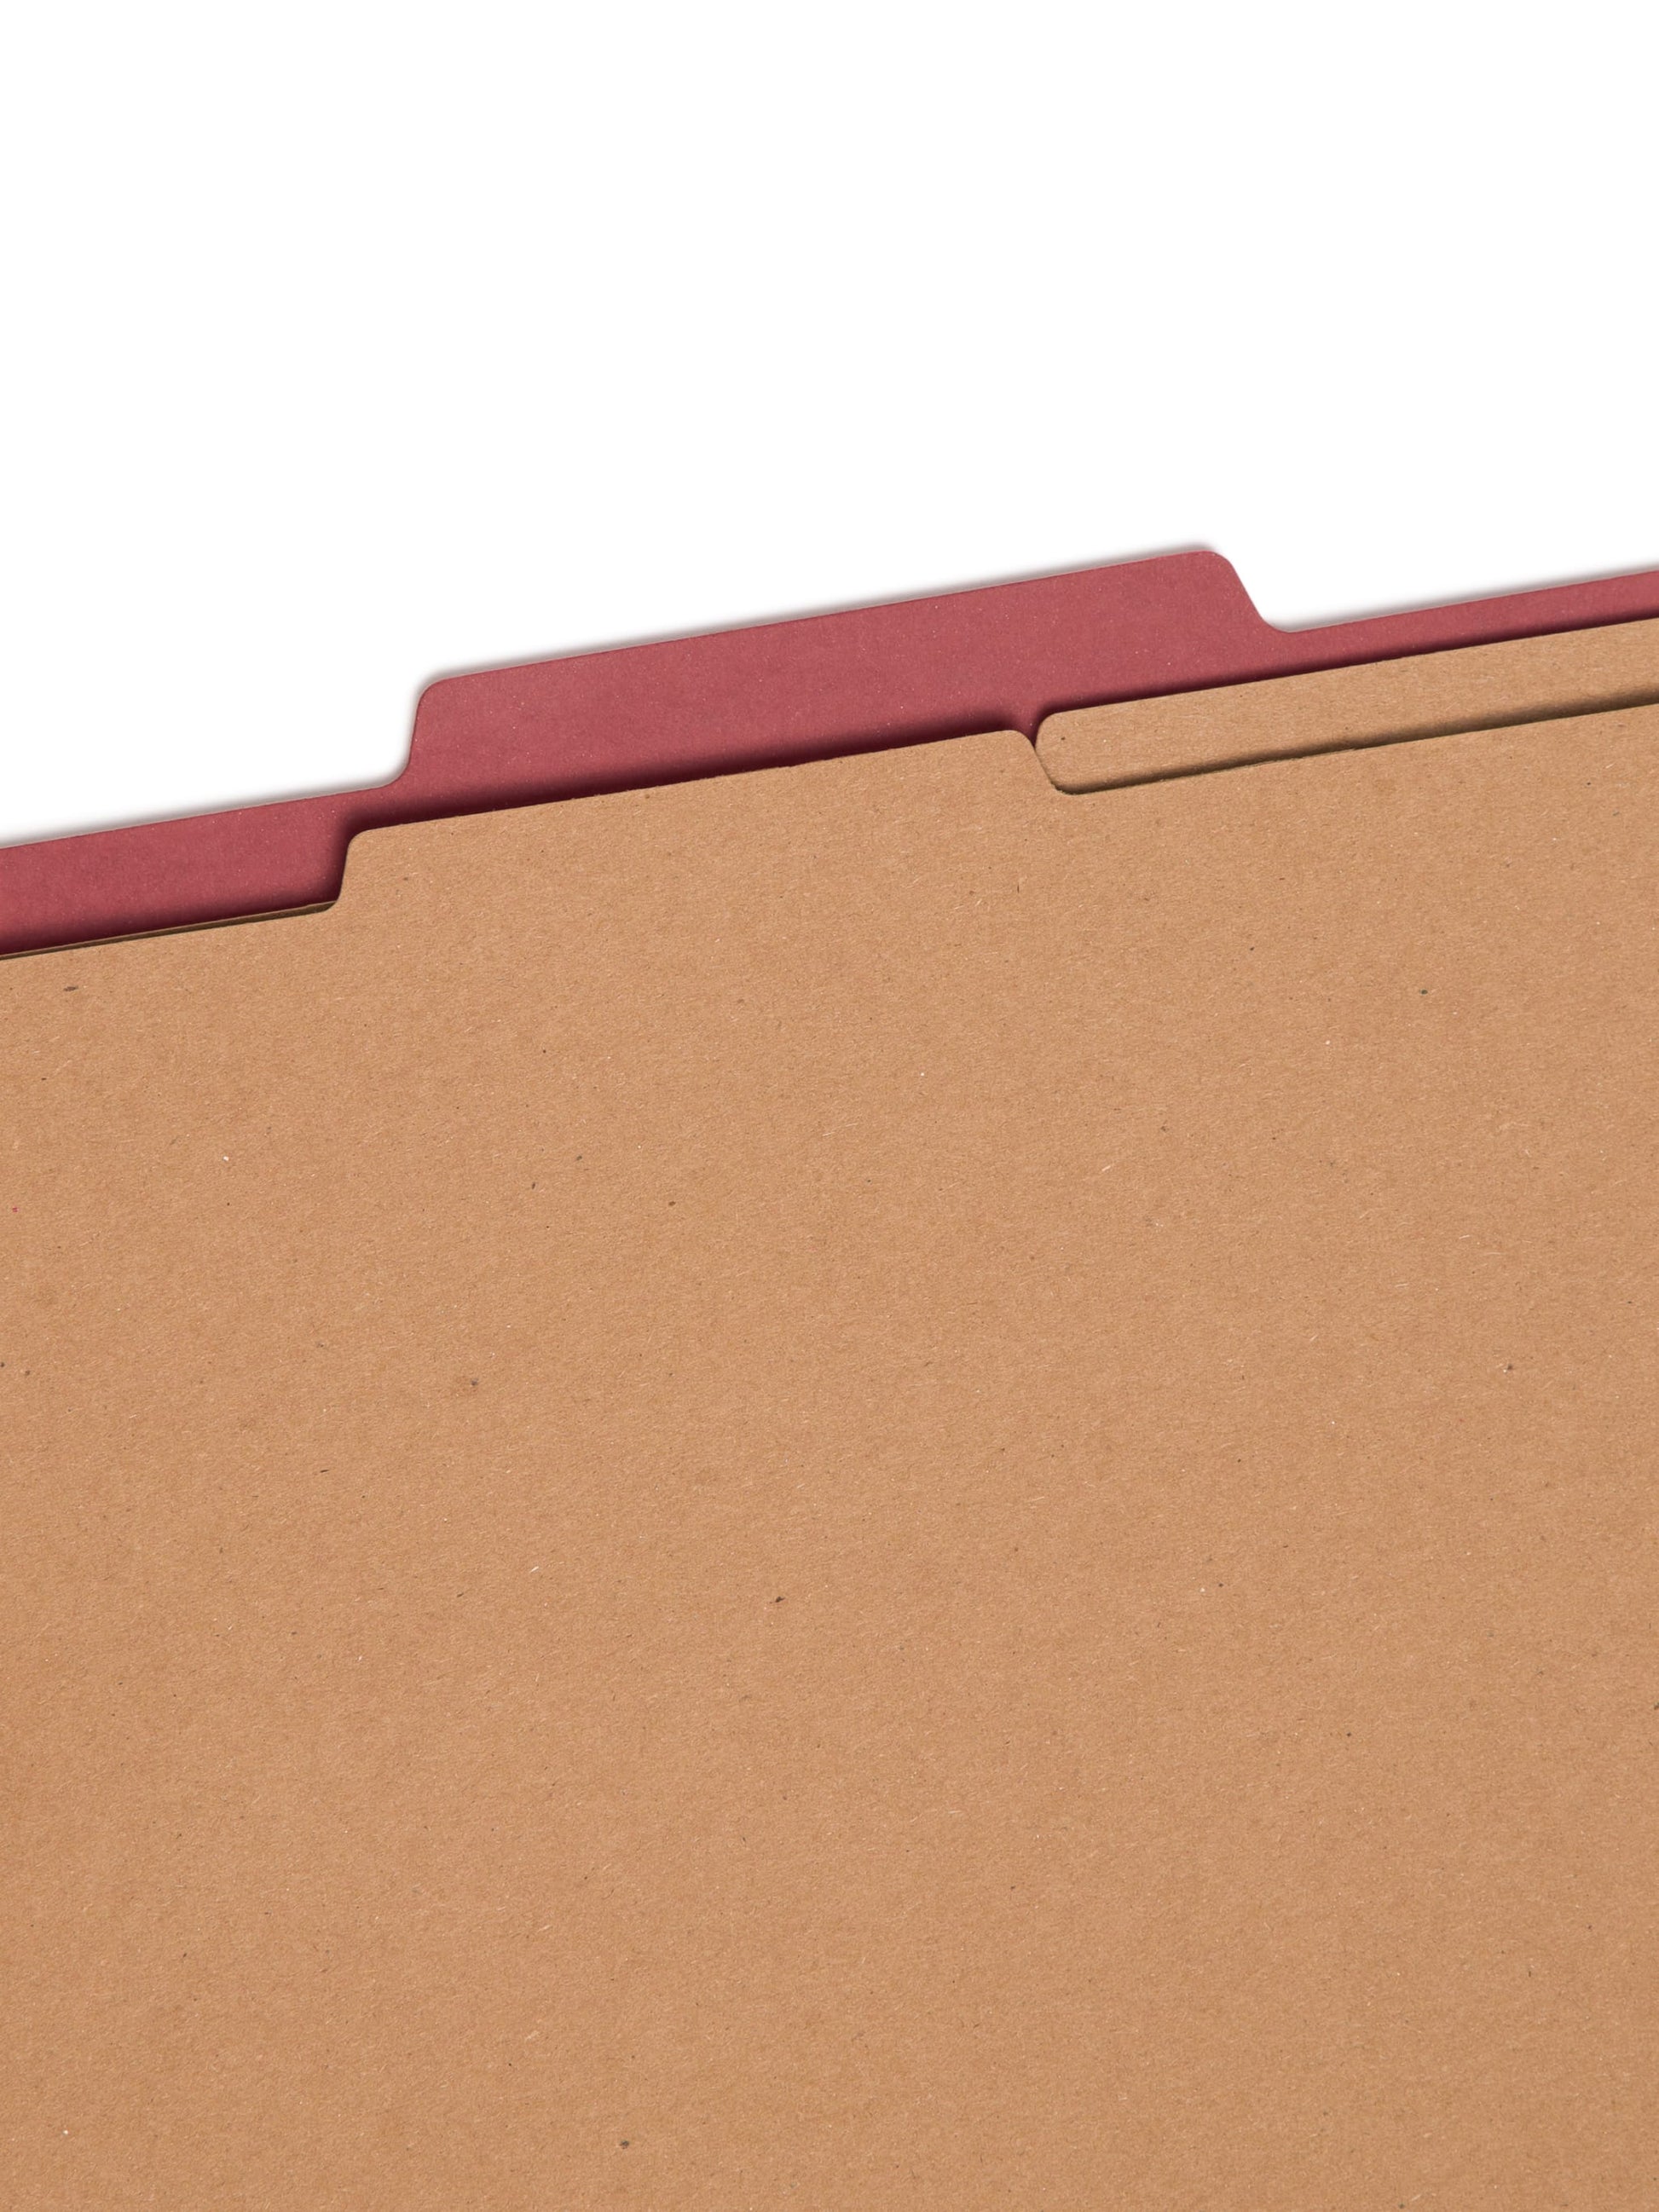 Pressboard Classification File Folders, 2 Dividers, 2 inch Expansion, Red Color, Legal Size, 